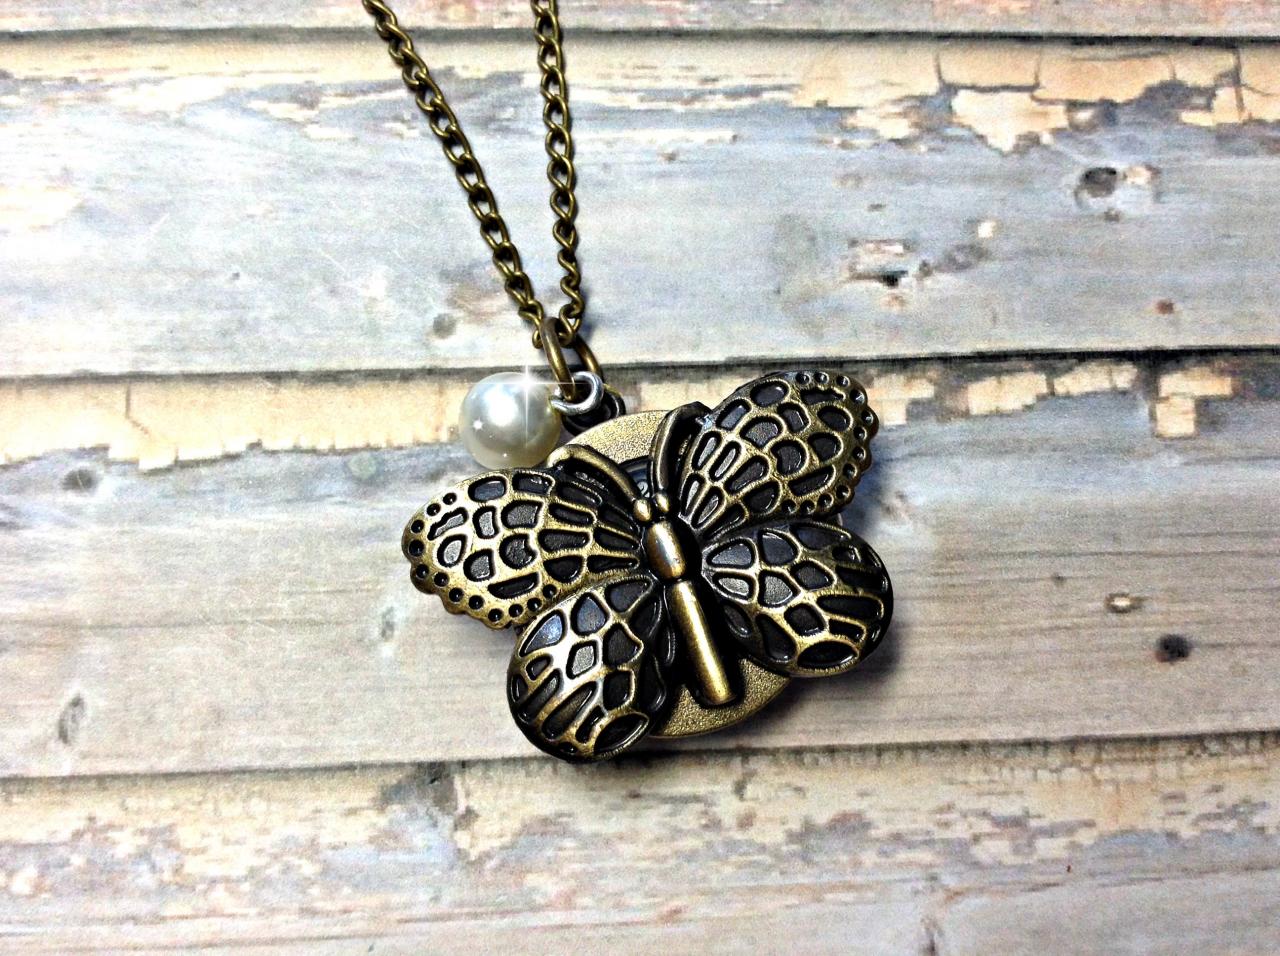 Handmade Vintage Butterfly Pocket Watch Necklace With Pearl Pendant